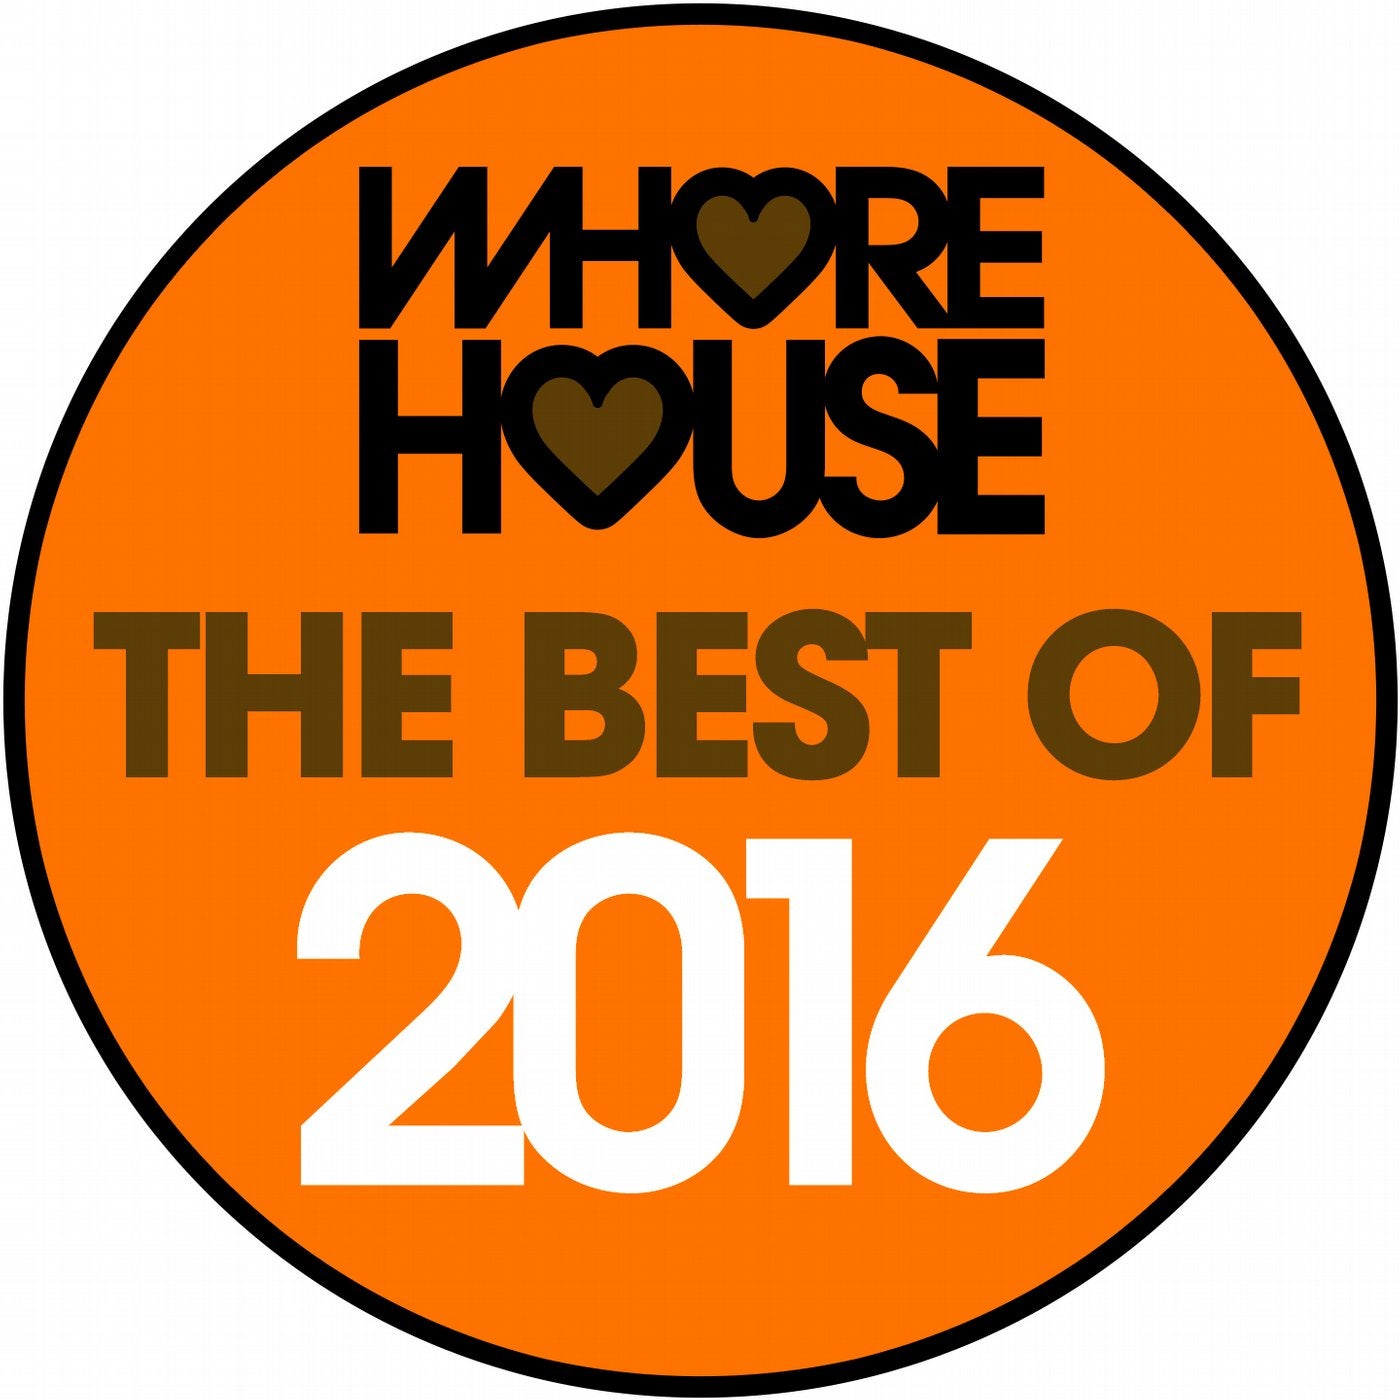 The Best Of Whore House 2016